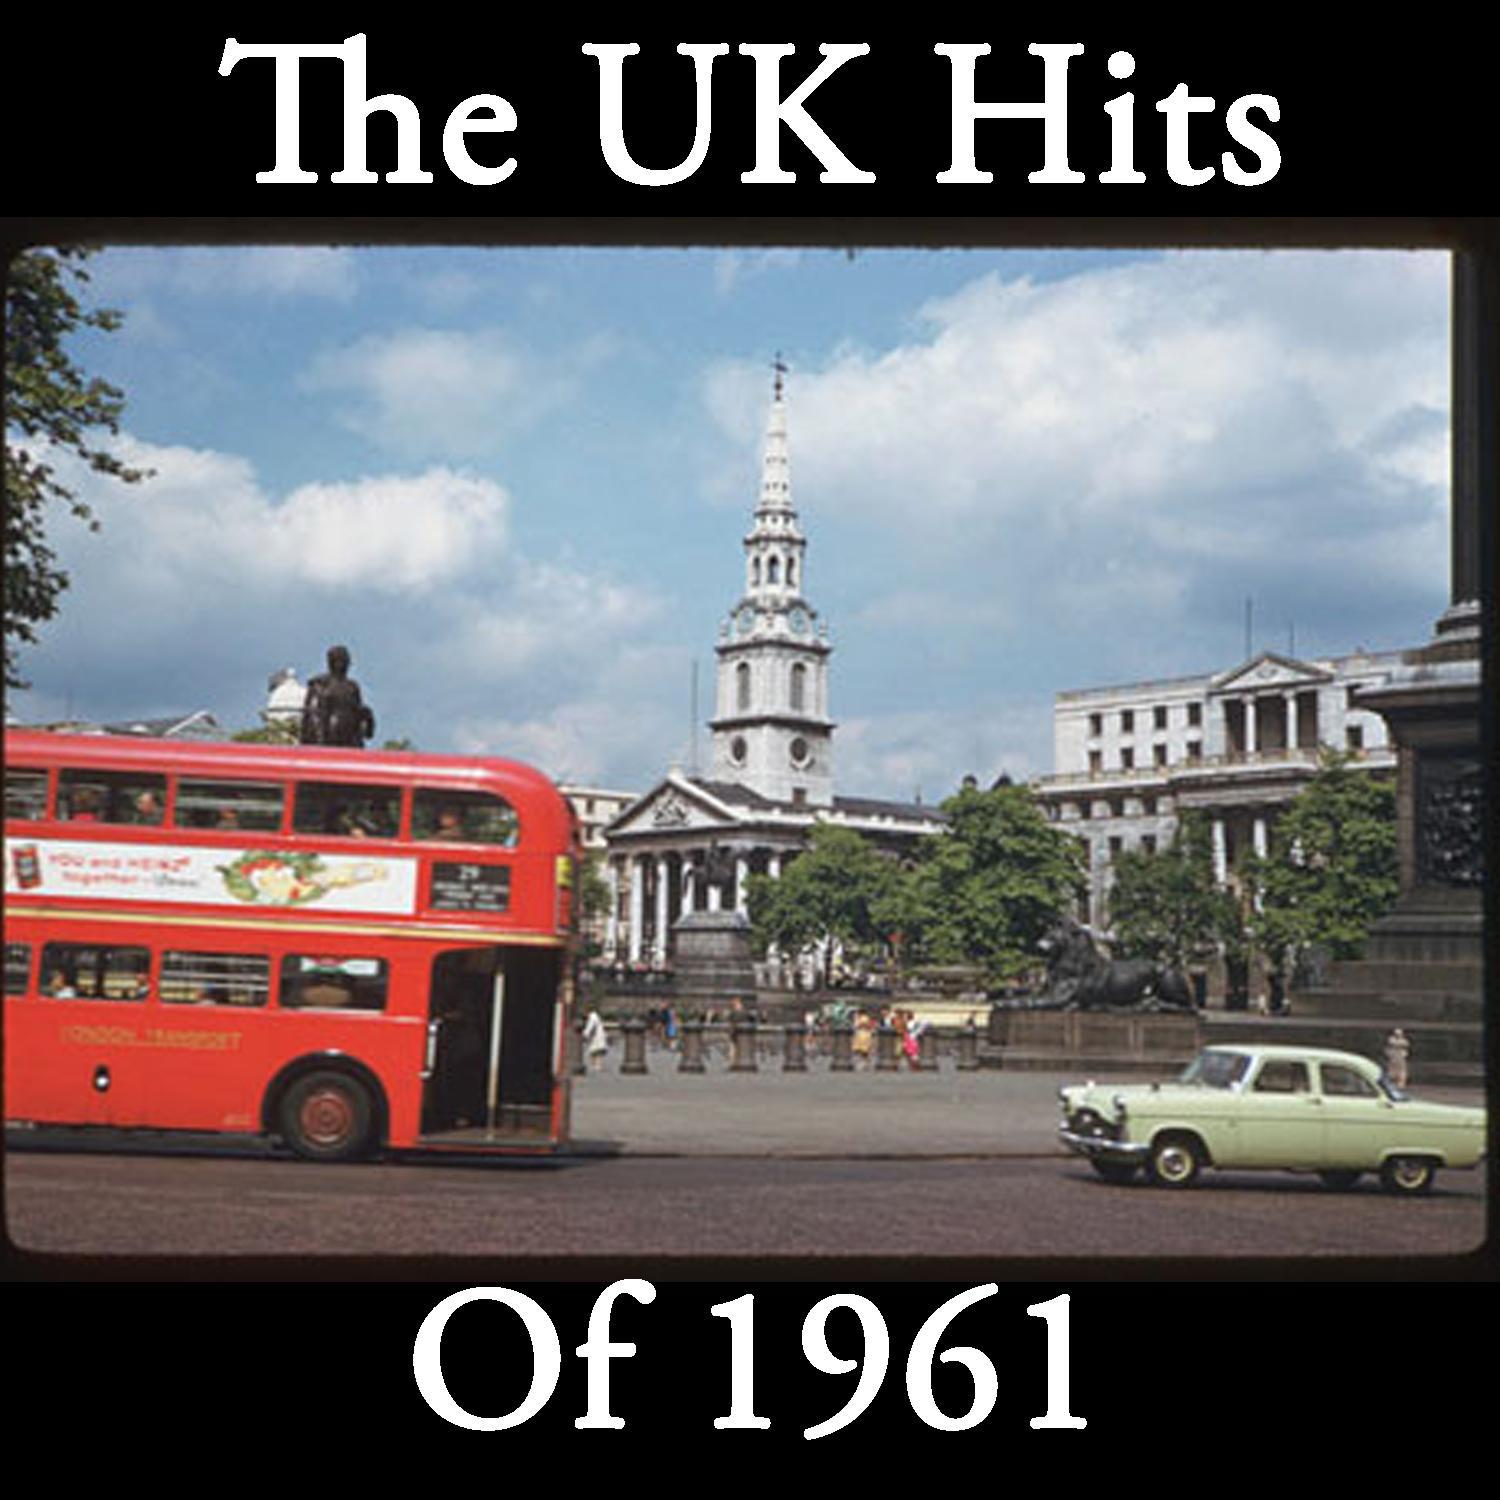 The UK Hits of 1961, Vol. 1